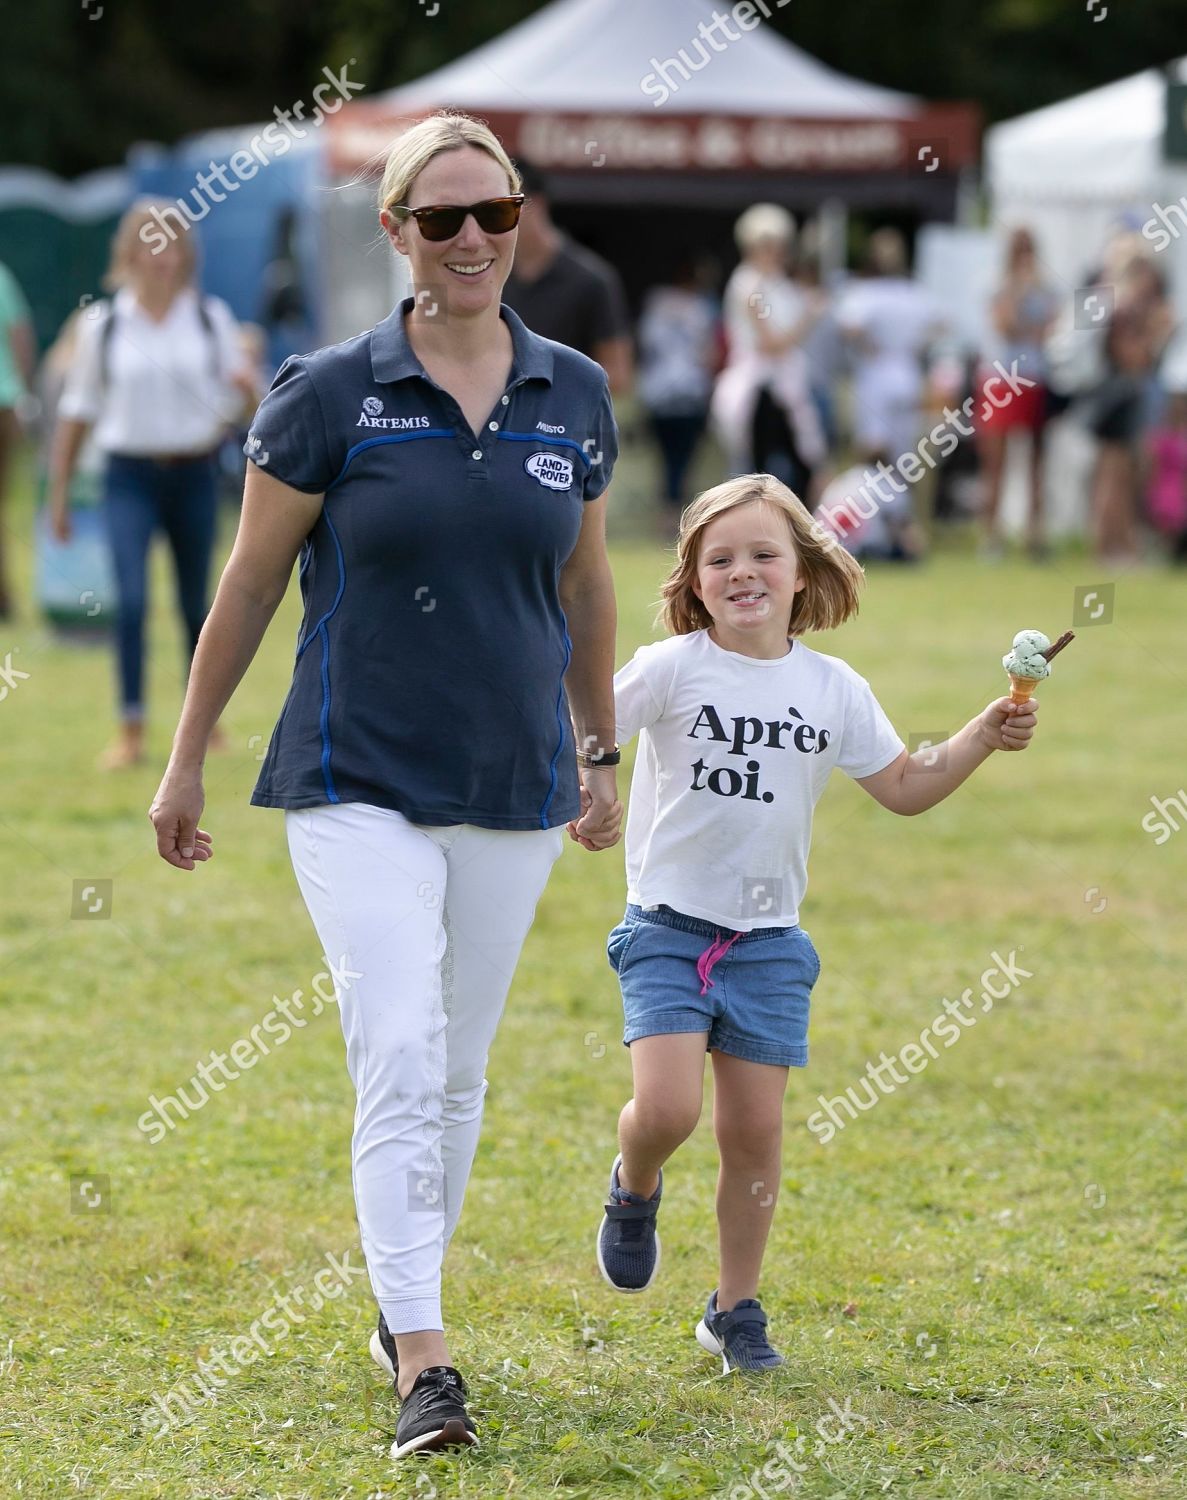 the-whatley-manor-horse-trials-gatcombe-park-gloucestershire-uk-shutterstock-editorial-10414615ar.jpg